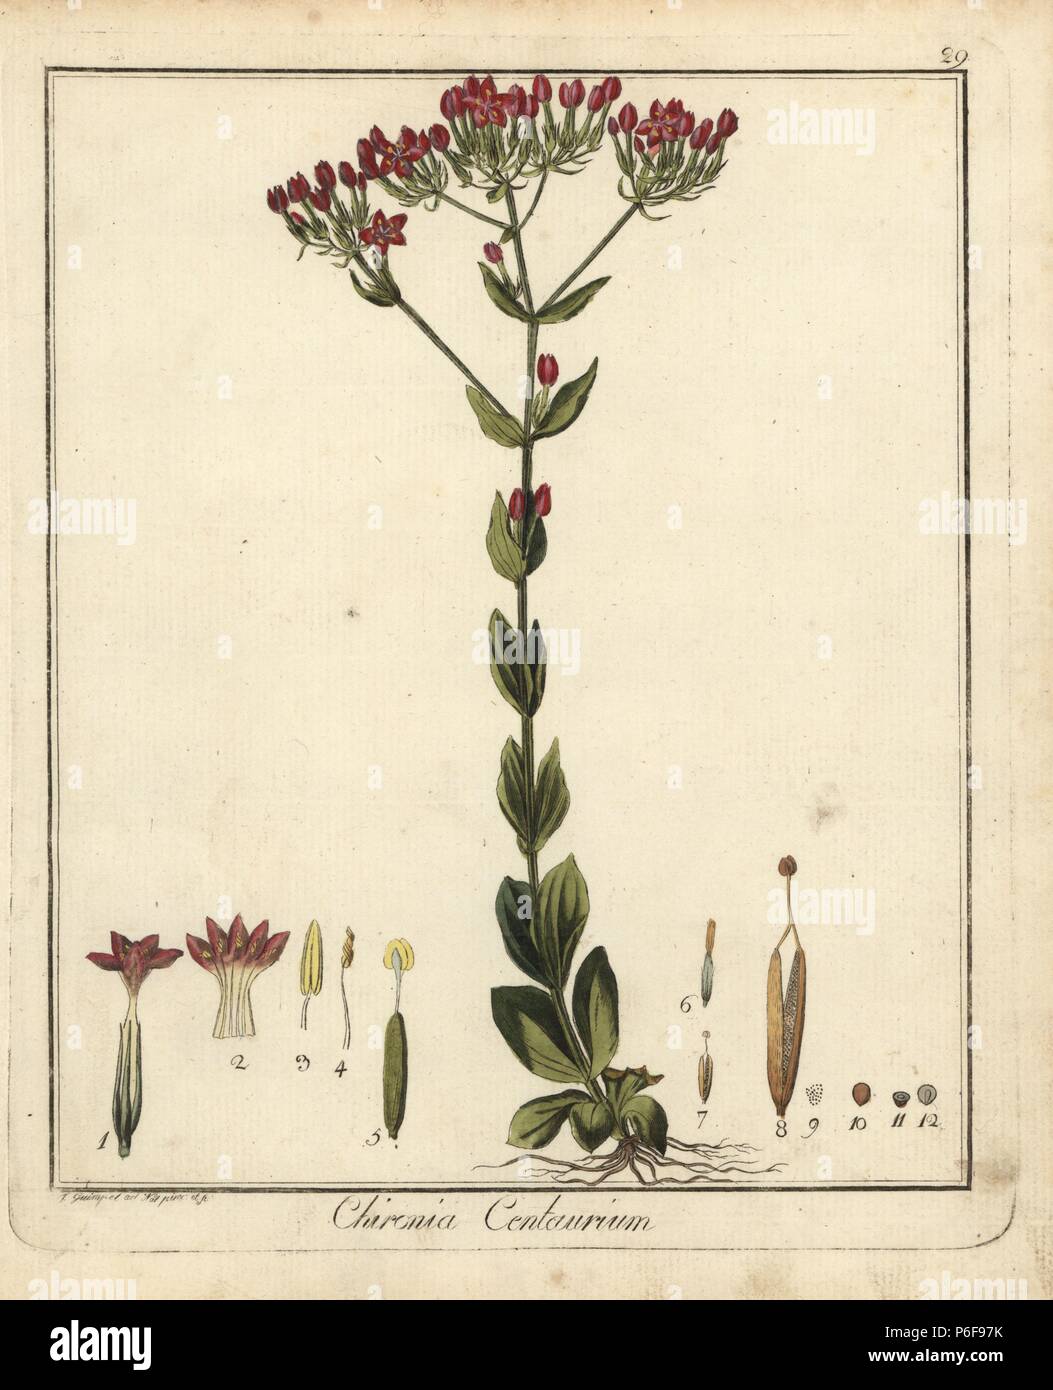 Common centaury, Centaurium erythraea. Handcoloured copperplate drawn from life and engraved by F. Guimpel from Dr. Friedrich Gottlob Hayne's Medical Botany, Berlin, 1822. Hayne (1763-1832) was a German botanist, apothecary and professor of pharmaceutical botany at Berlin University. Stock Photo